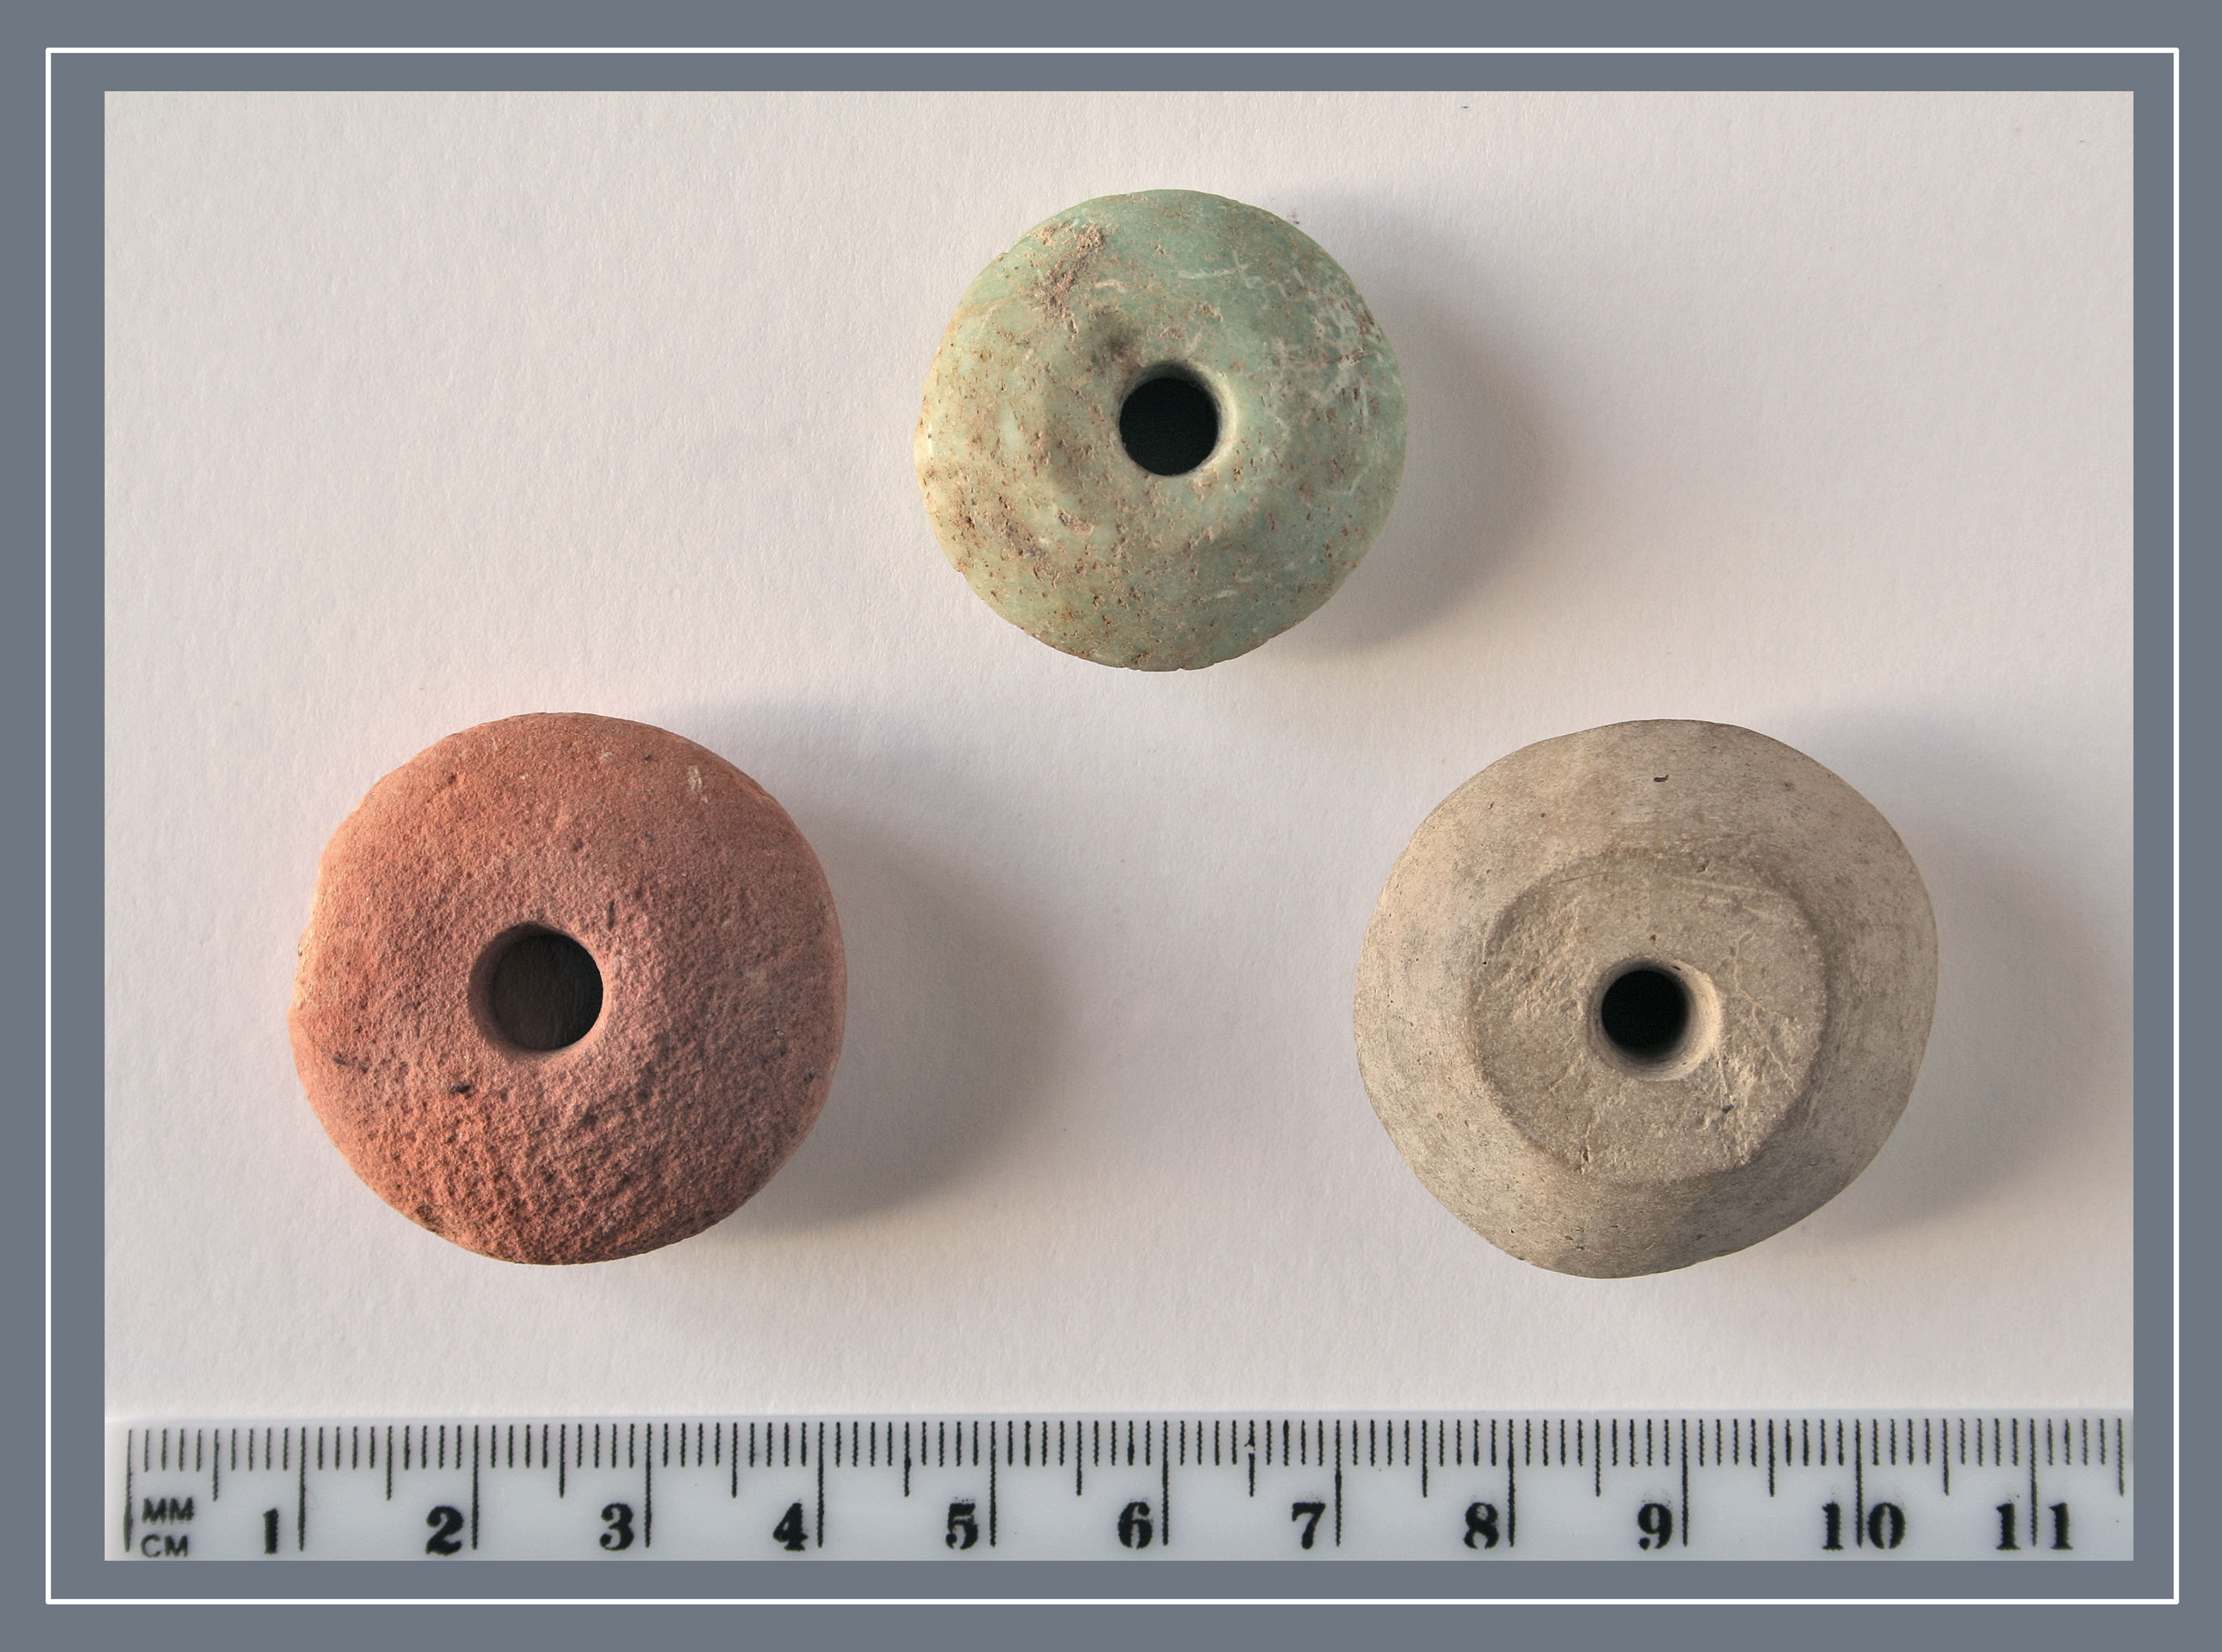 Stone weights from Tel Tsaf